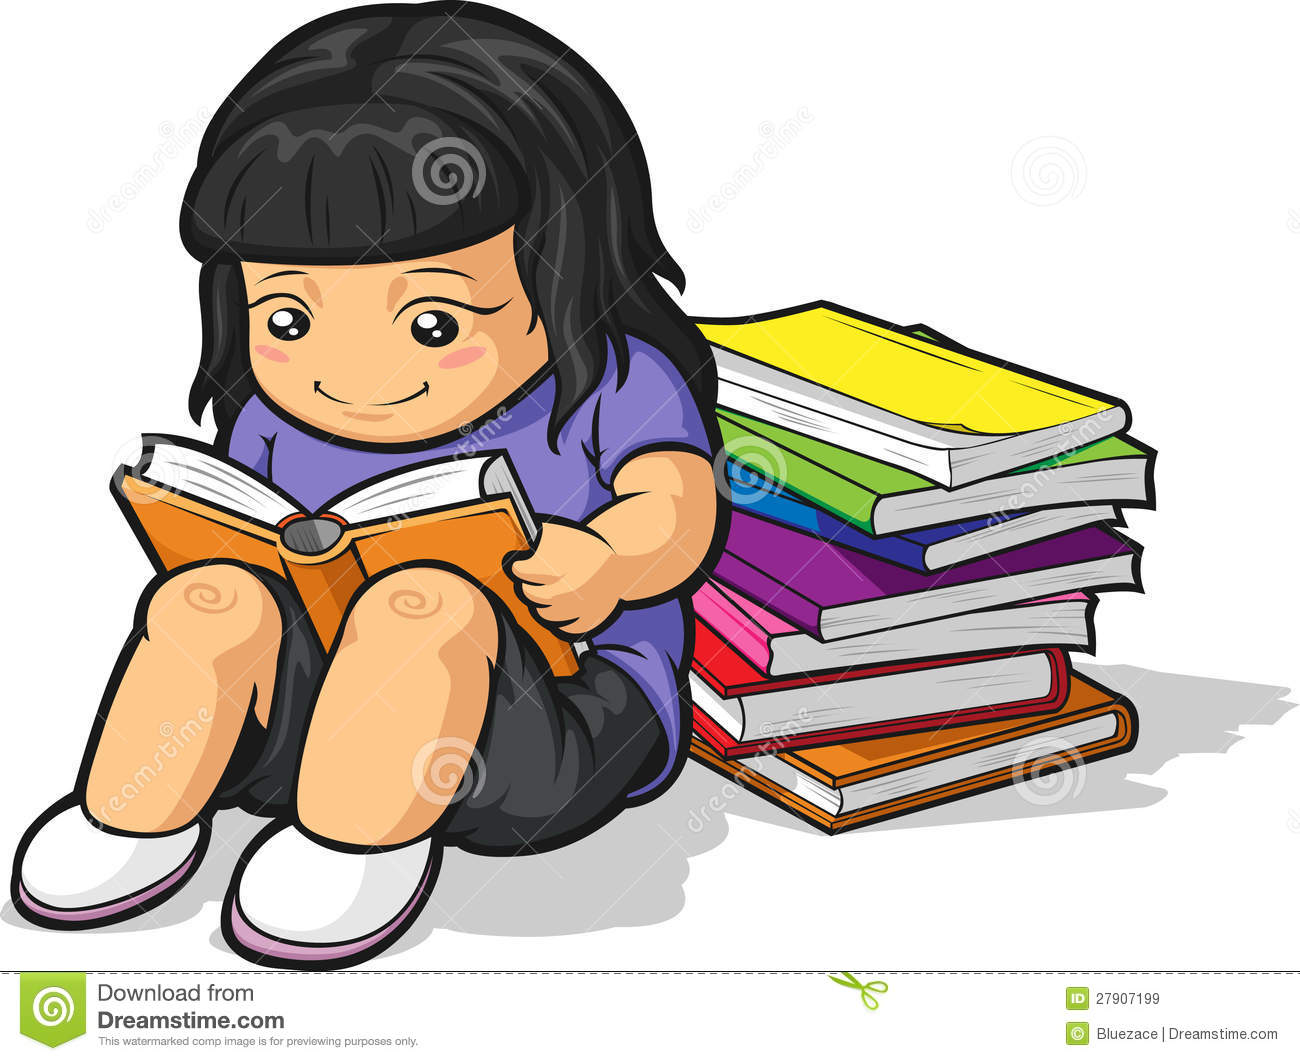 Cartoon Of Girl Student Studying   Reading Book Royalty Free Stock